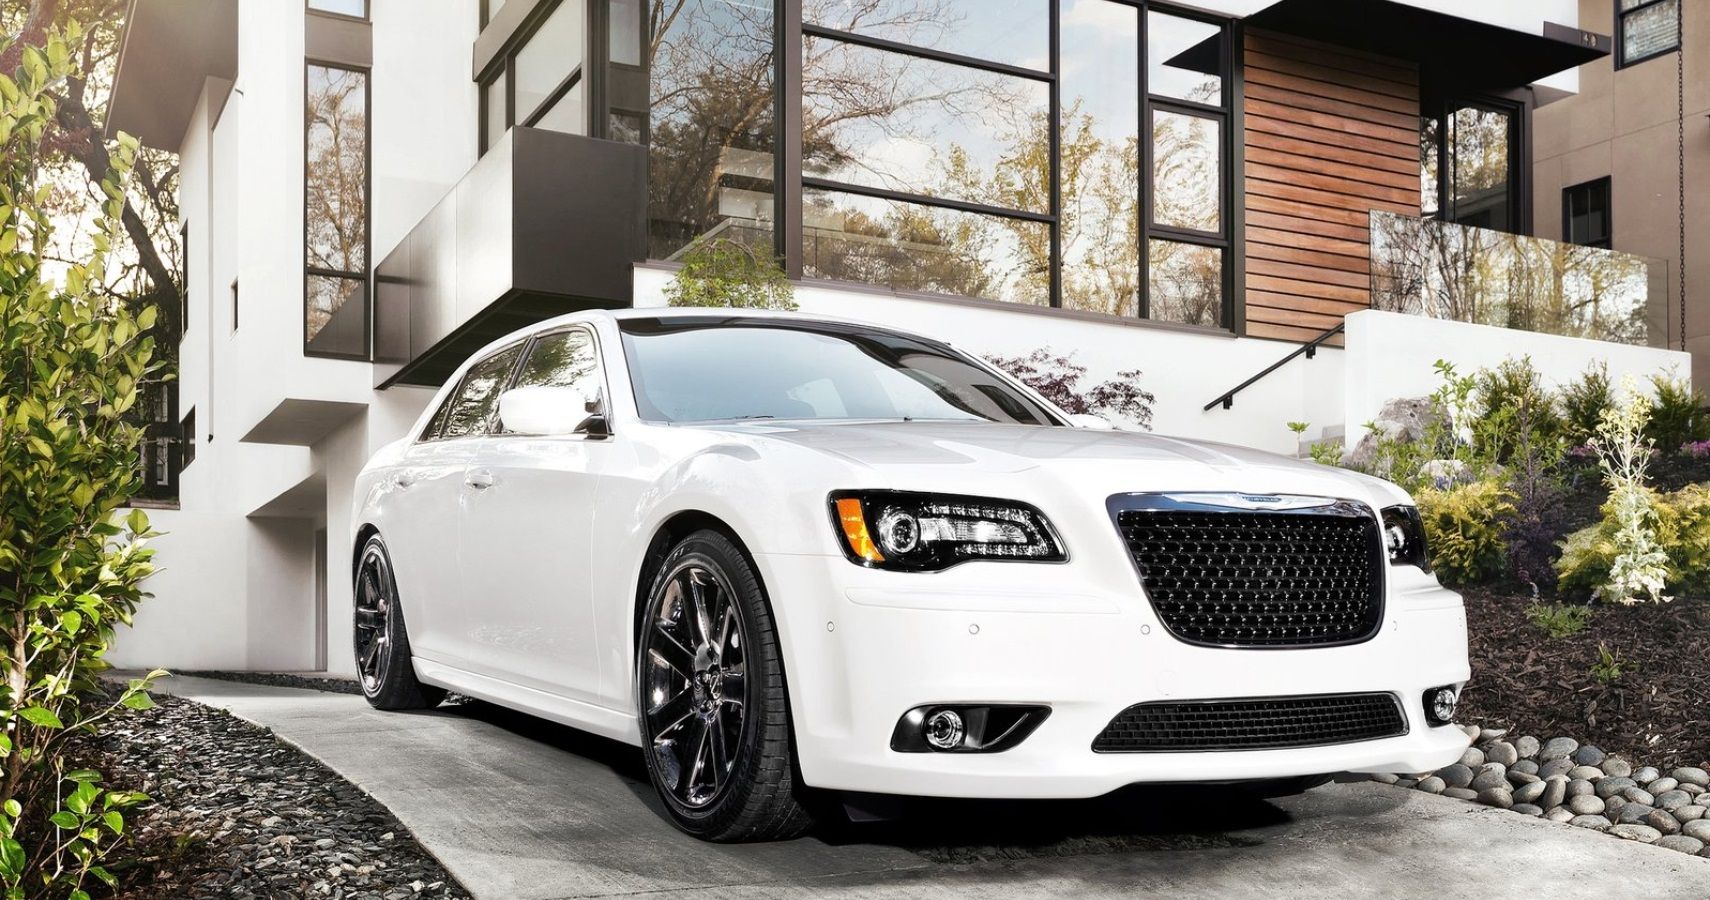 10 Things You Should Know Before Spending Your Money On A Used Chrysler 300 SRT8